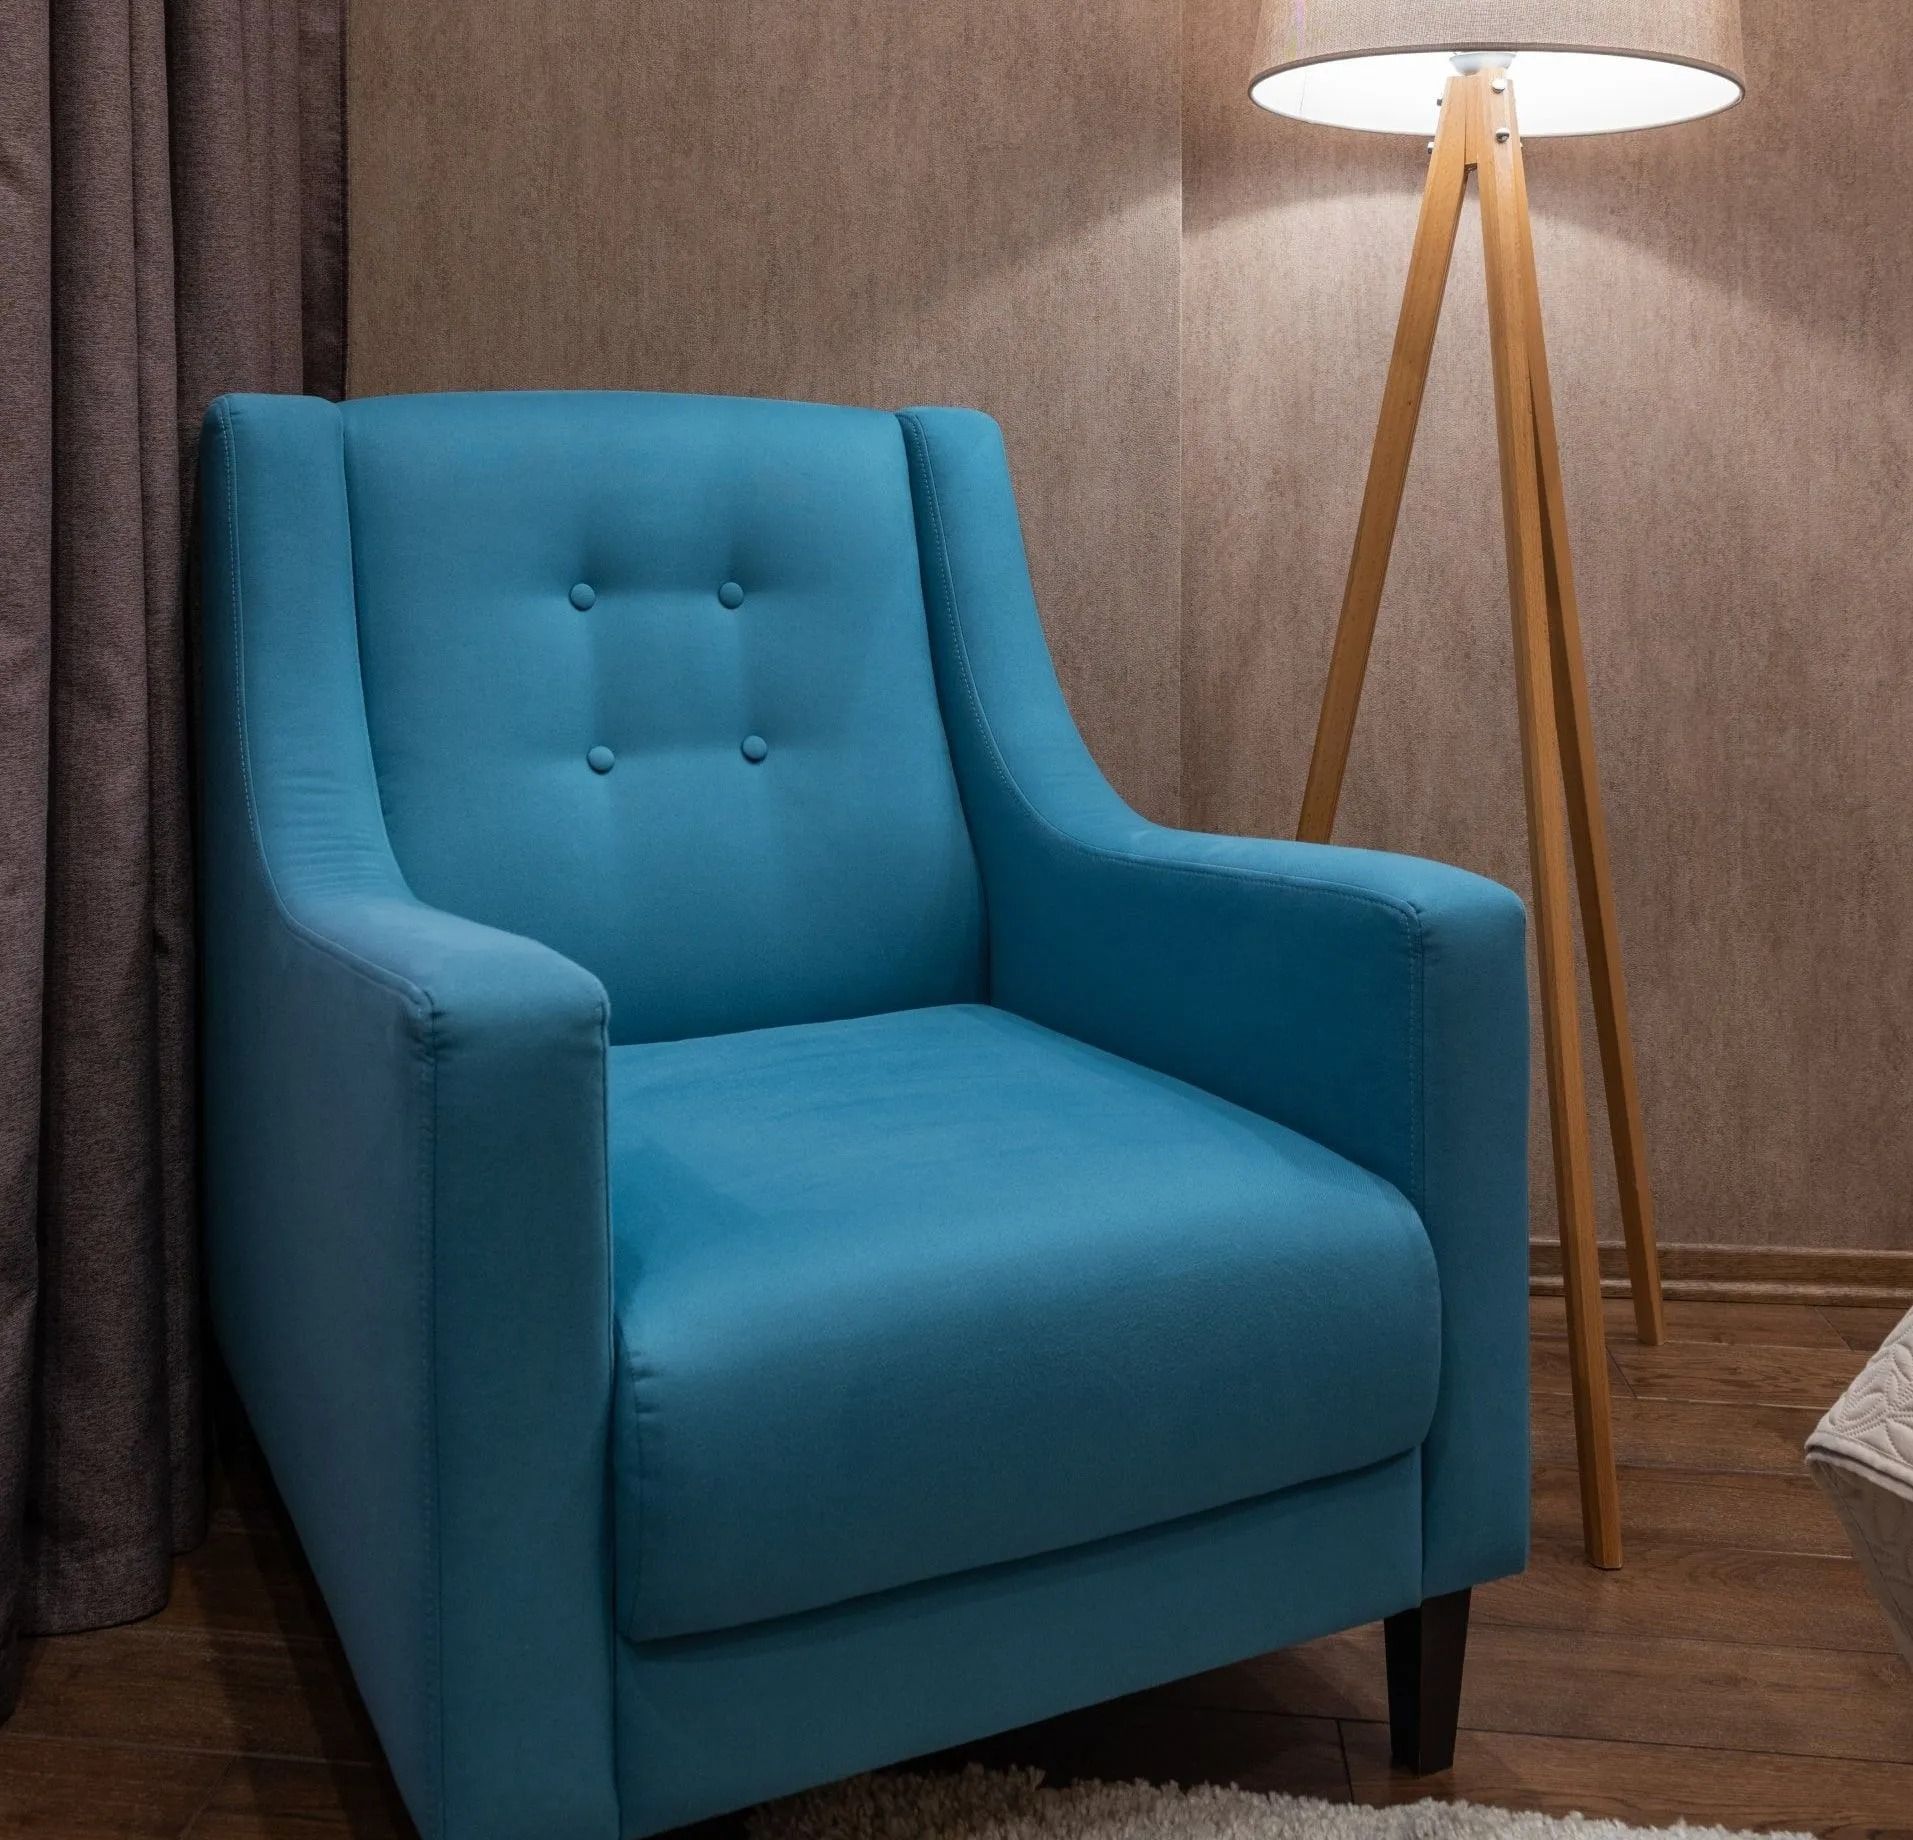 A Blue Chair Is Next to A Lamp